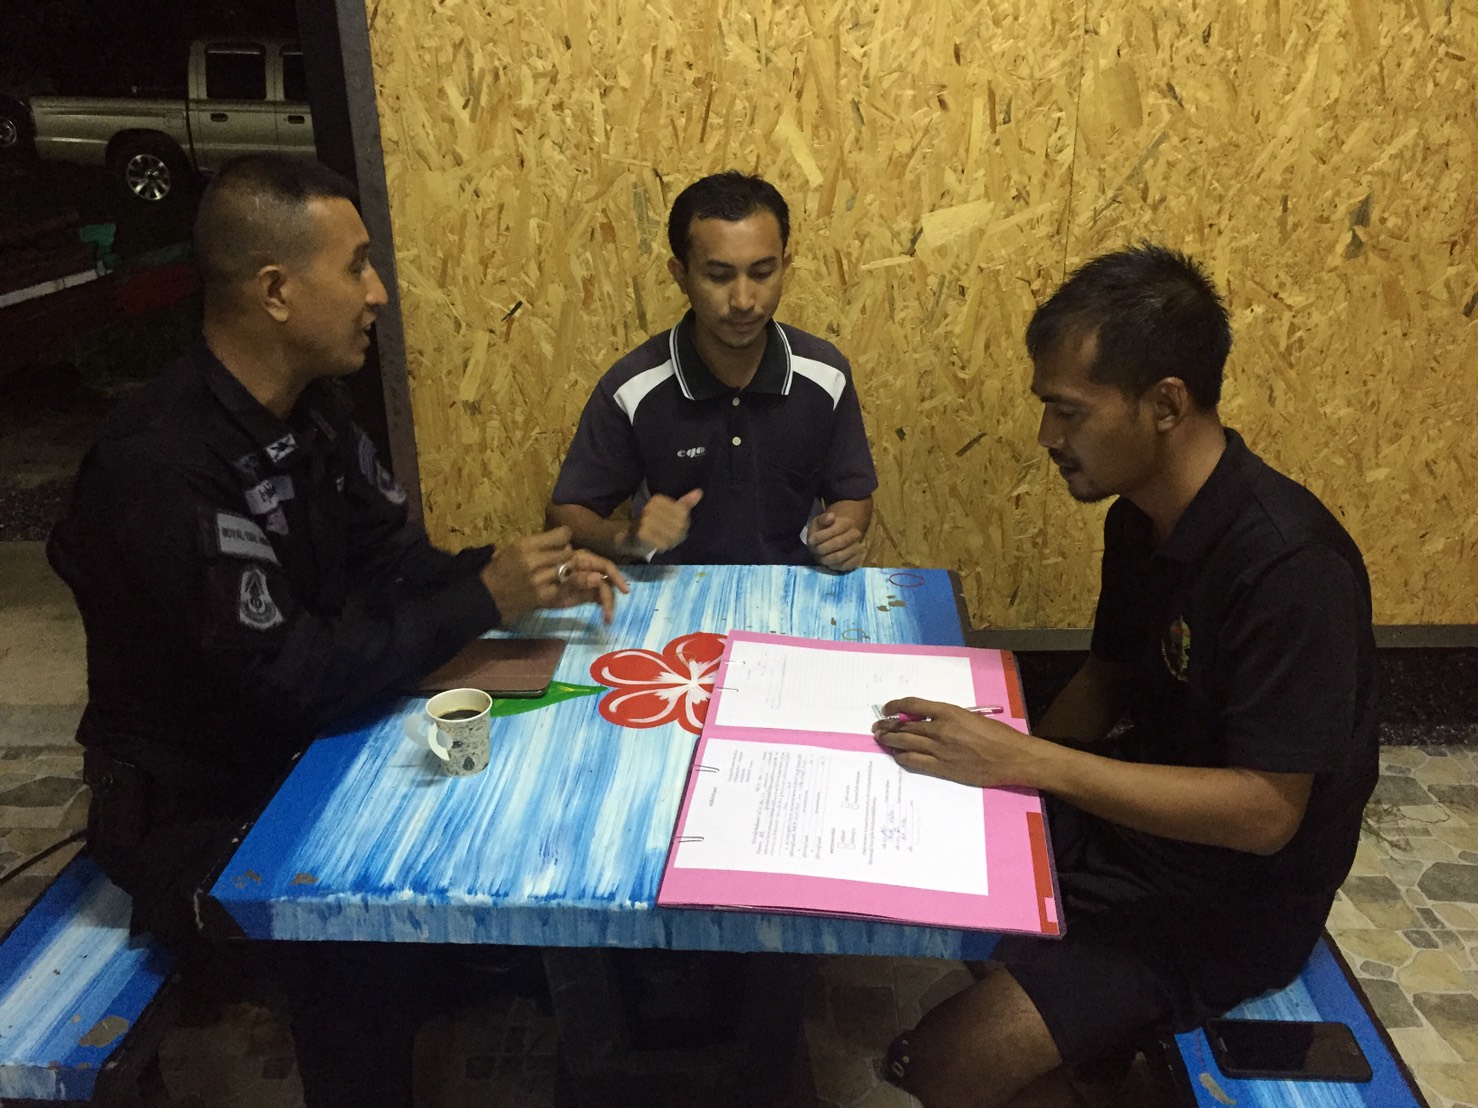 In this photo released by the ISOC, Abdullah Isomuso, center, is shown reading documents inside Fort Ingkhayut on July 20.